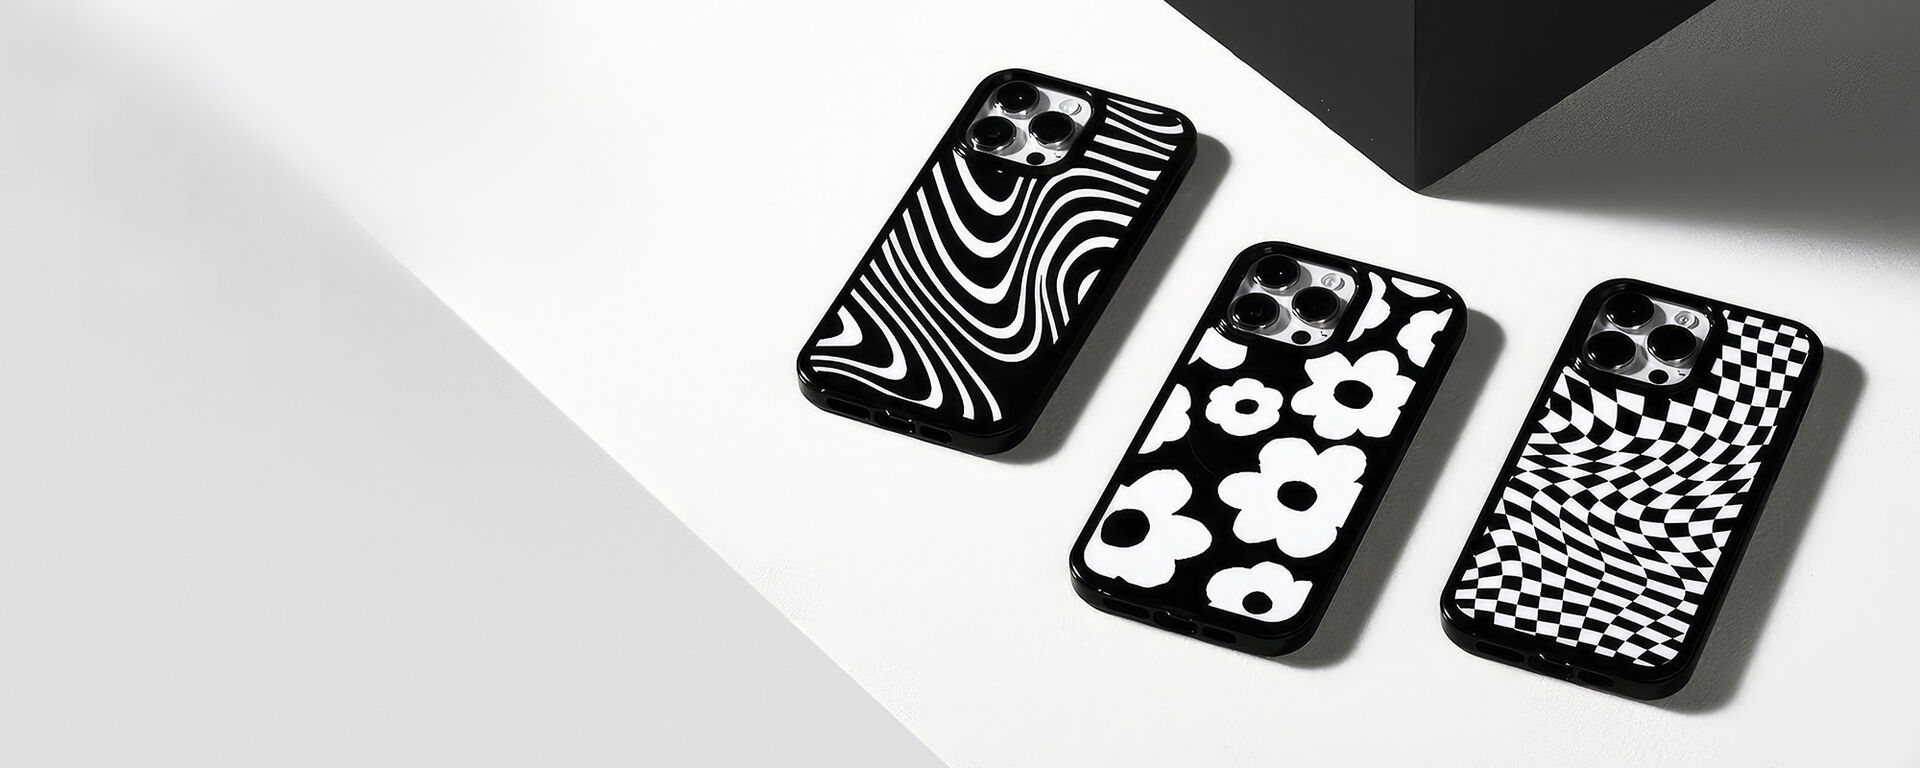 Black and White Symmetry iPhone cases